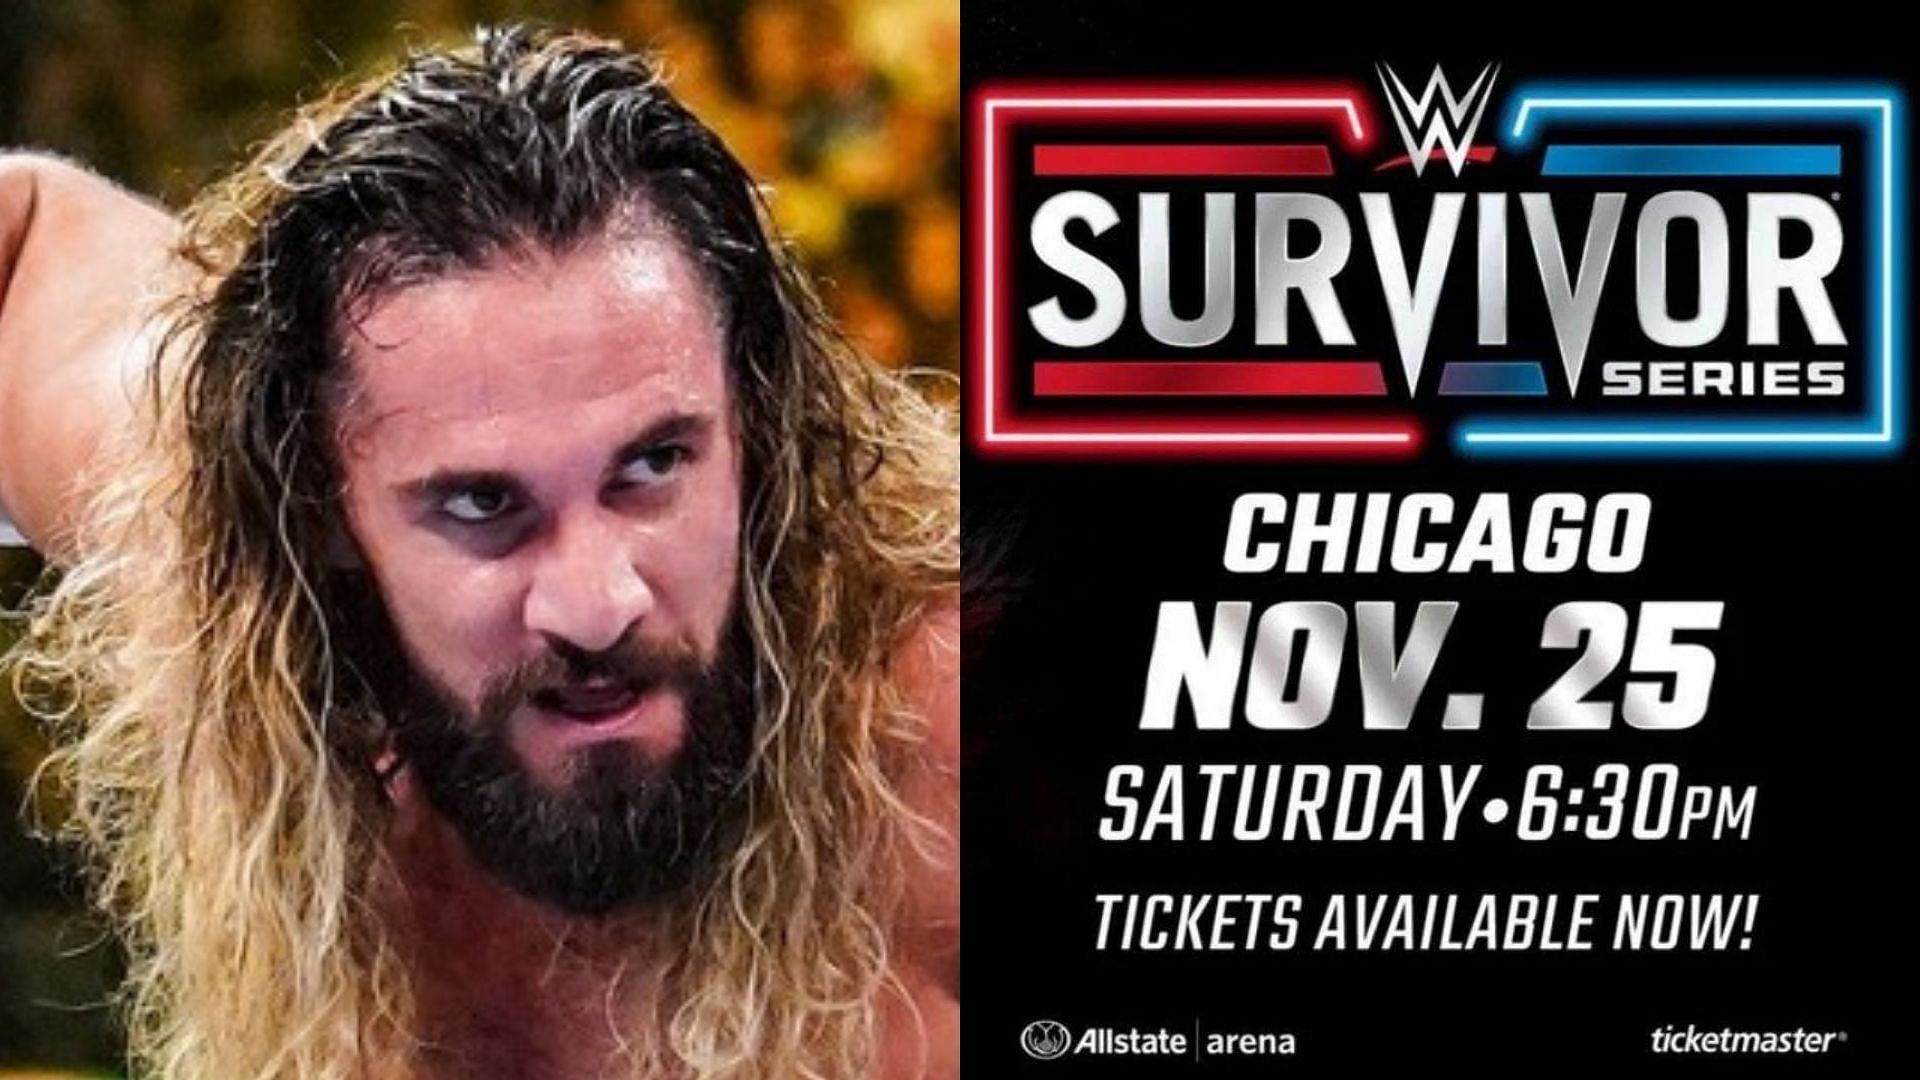 Will a former WWE Champion confront Seth Rollins at Survivor Series?